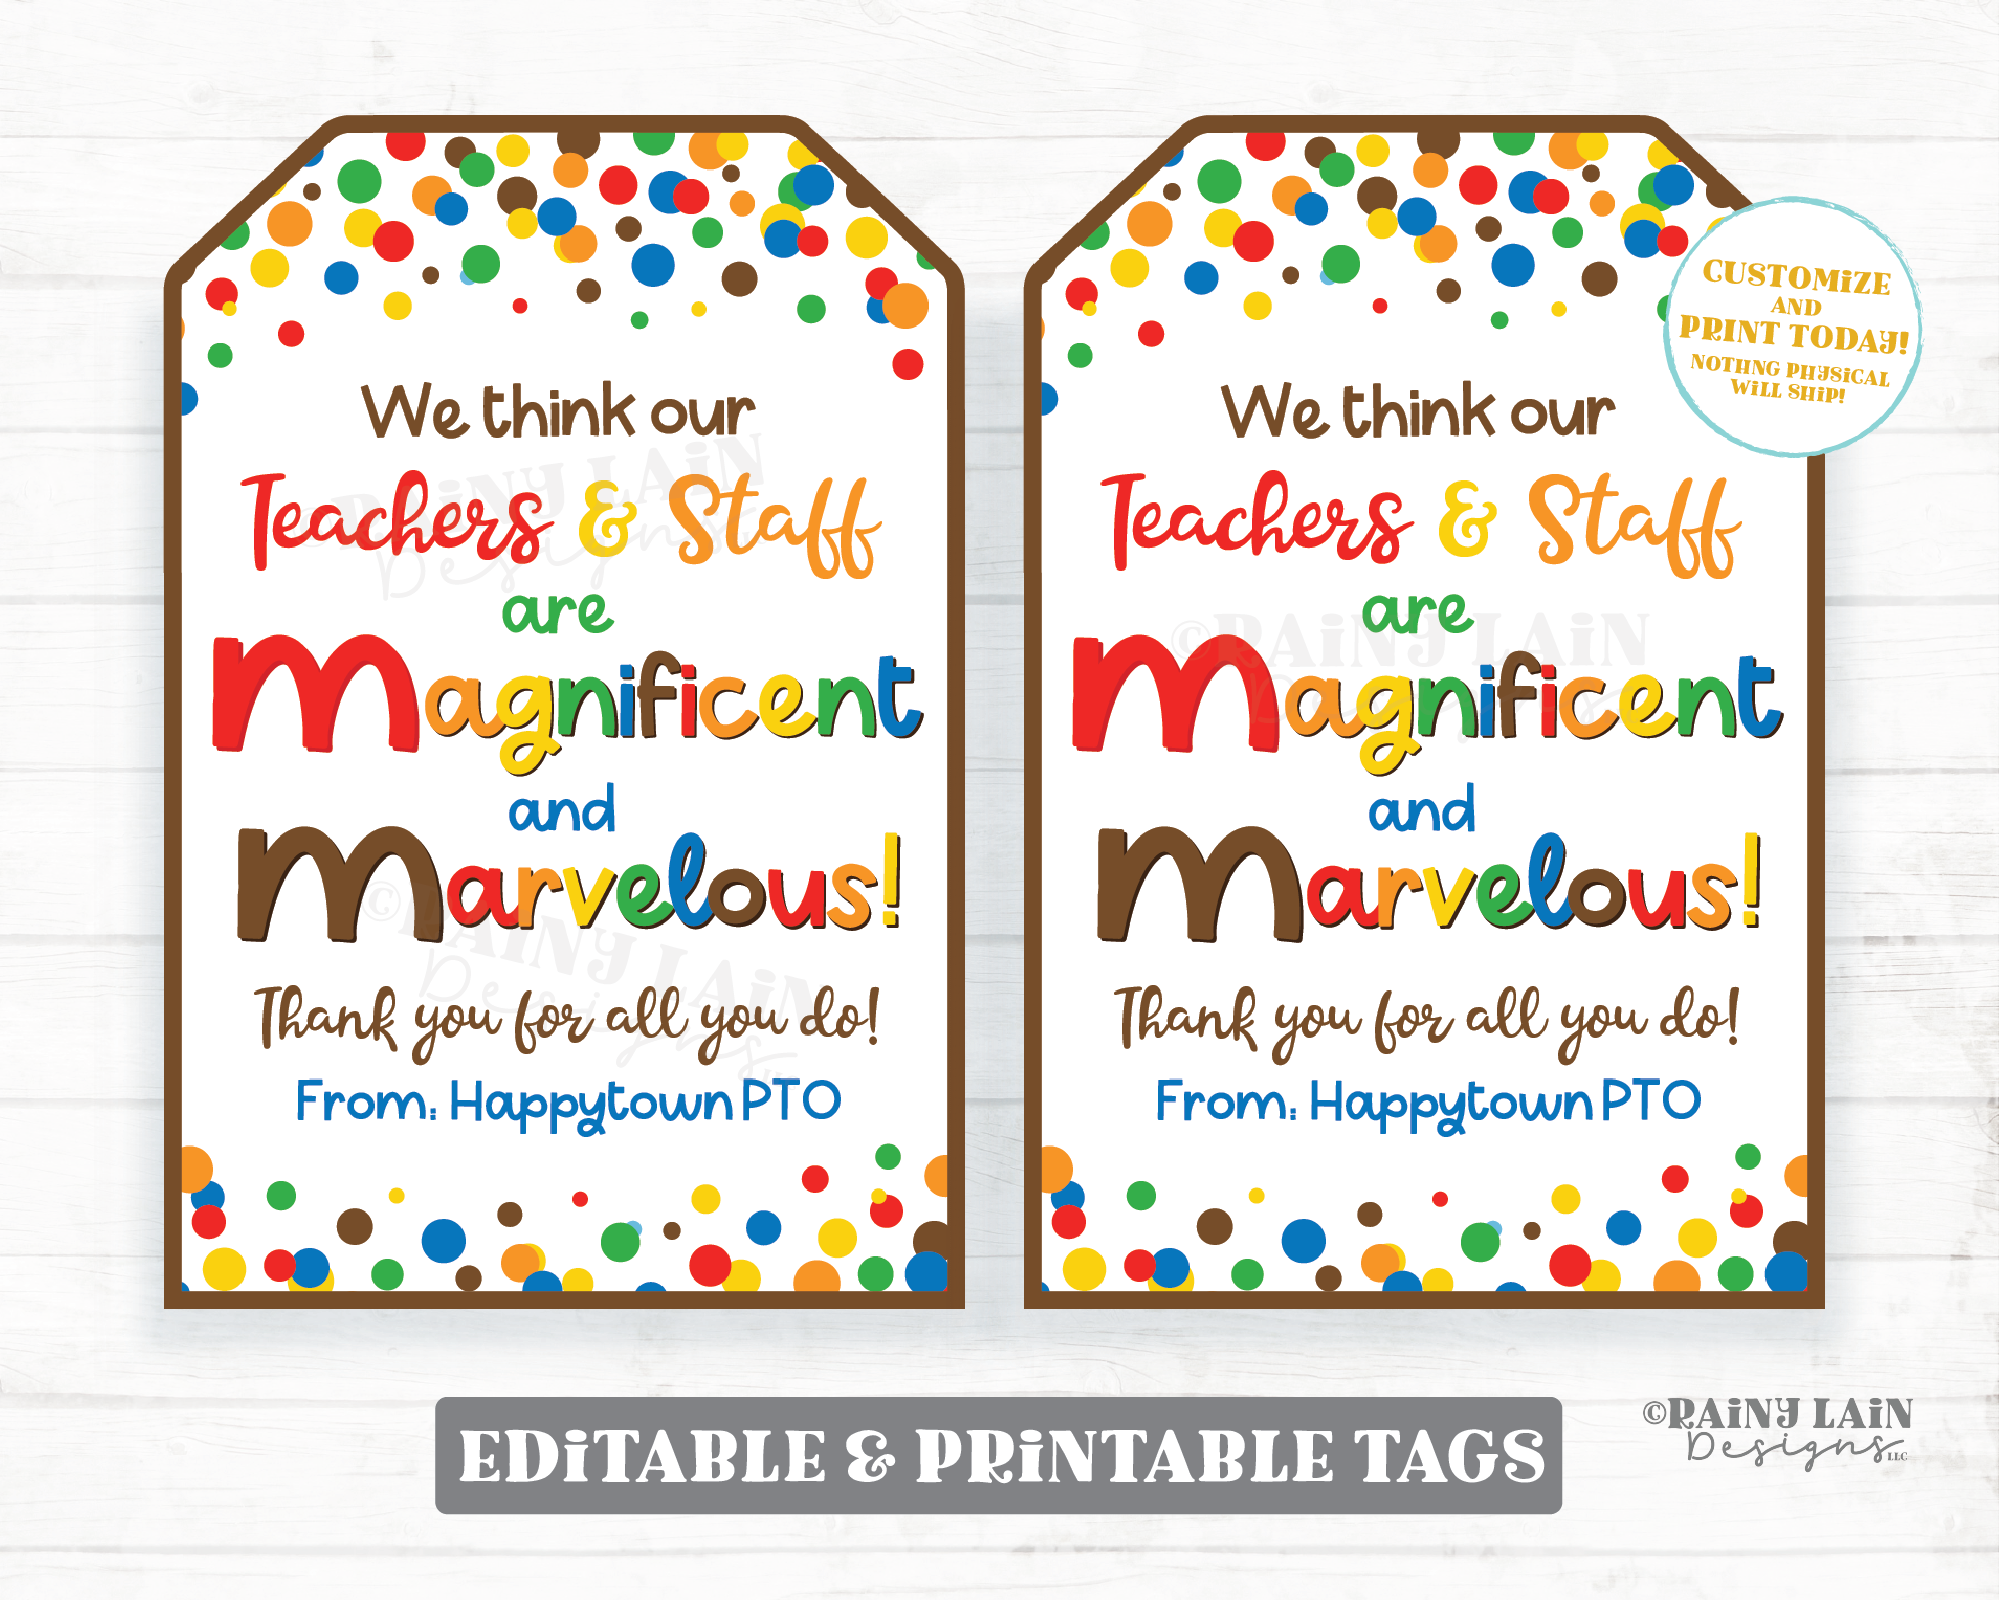 Magnificent & Marvelous Tag Ms Chocolate Teacher Gift Thank you Employee Appreciation Staff Room Candy PTO School Lounge Candies